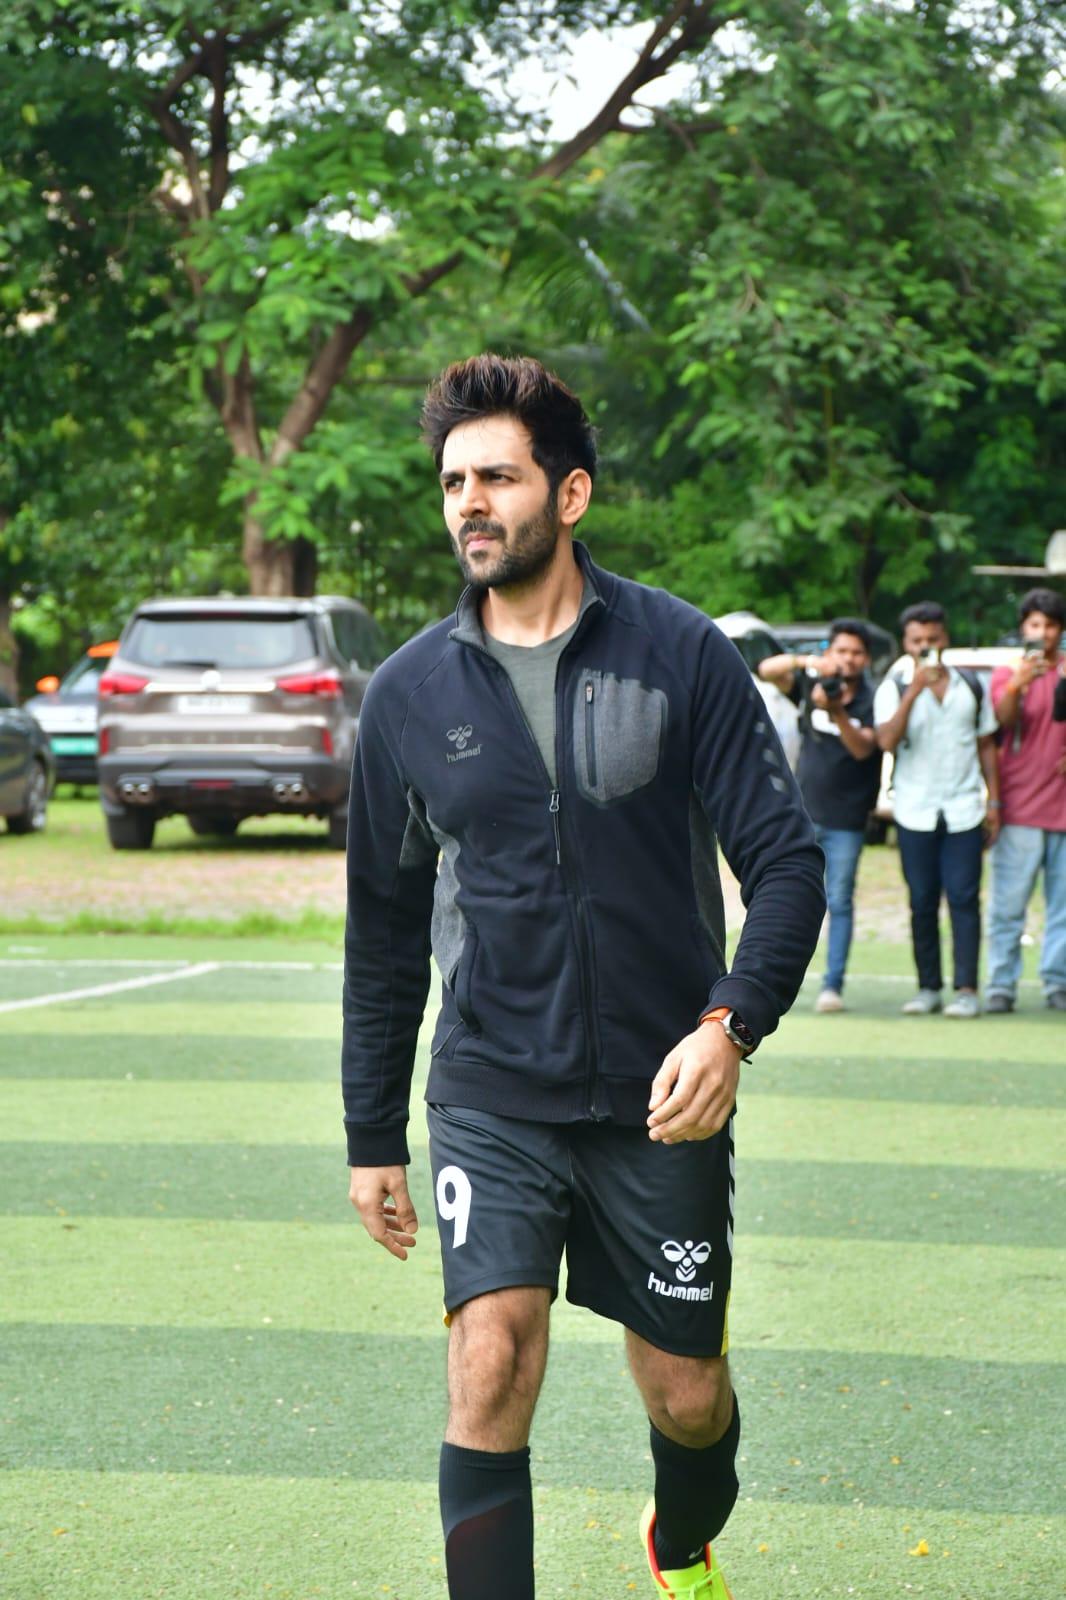 Kartik Aaryan, while widely known for his charming on-screen presence, brought his A-game to the football field.